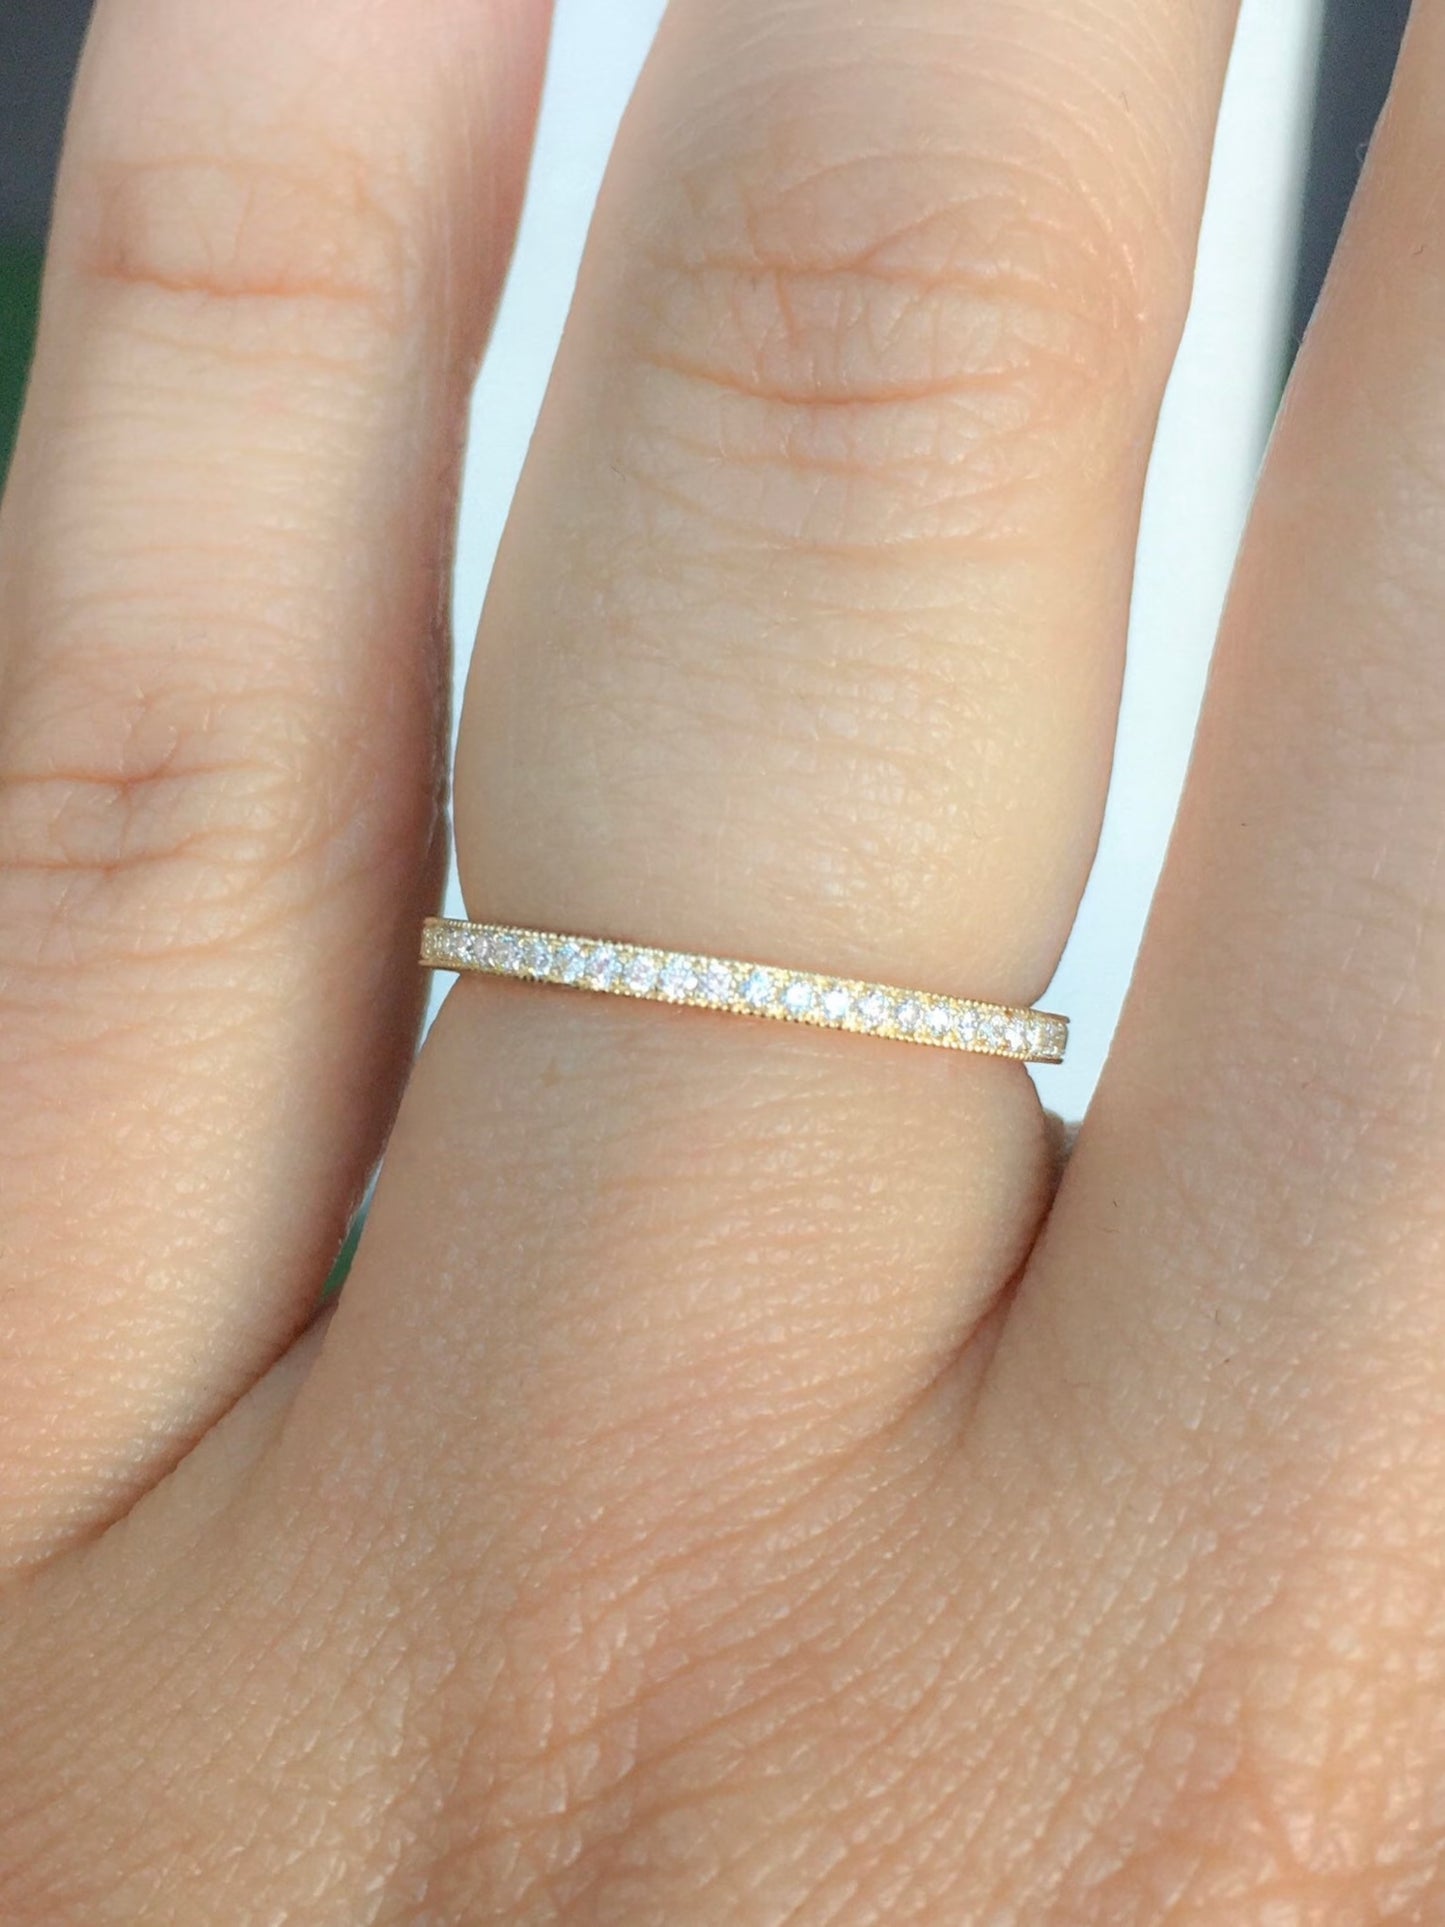 Reserved for Anna ONLY - 2mm 3/4 Eternity Milgrain Channel Pave Diamond Band with a Space Bar